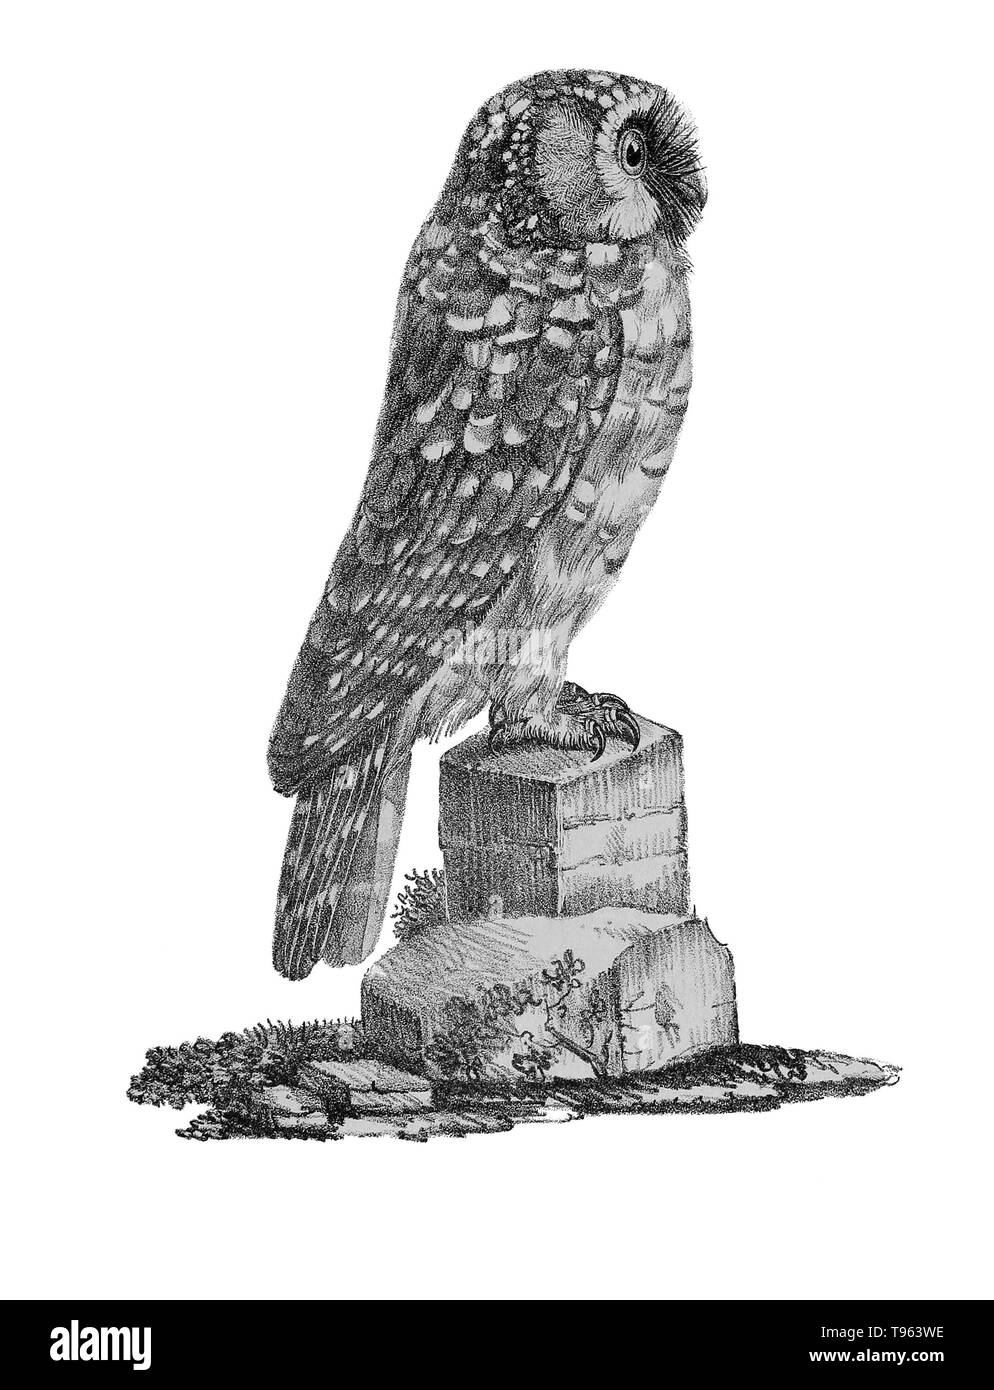 Tengmalm's owl (Aegolius funereus) from La galerie des oiseaux du Cabinet d'histoire naturelle du Jardin du roi, 1834 edition, written by Louis Pierre Vieillot, with plates by Paul Louis Oudart. Vieillot, a French ornithologist, was the first to describe and name many American bird species. Tengmalm's owl, also known as the boreal owl, is found in both northern Eurasia and North America. Stock Photo